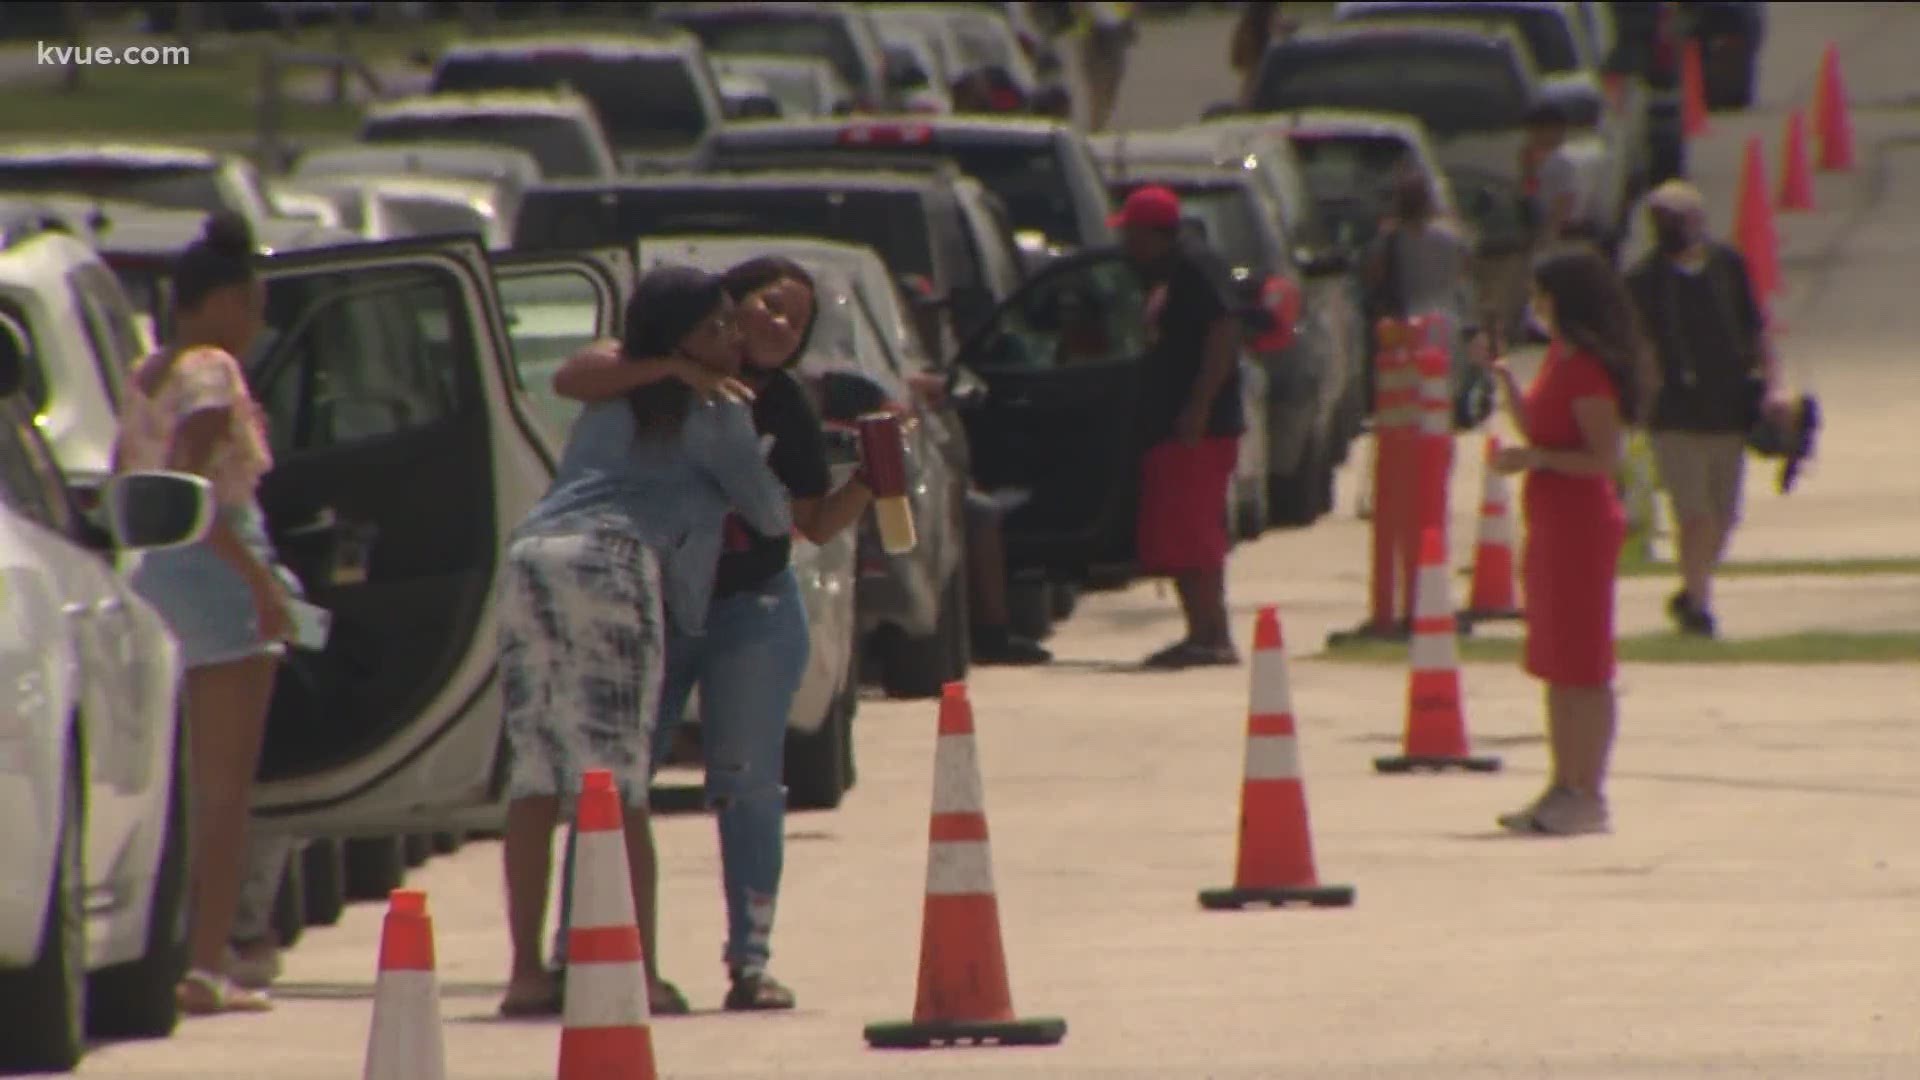 People are evacuating from the Texas coast to Central Texas in hopes of finding shelter. KVUE's Molly Oak says some are frustrated, but many are staying positive.